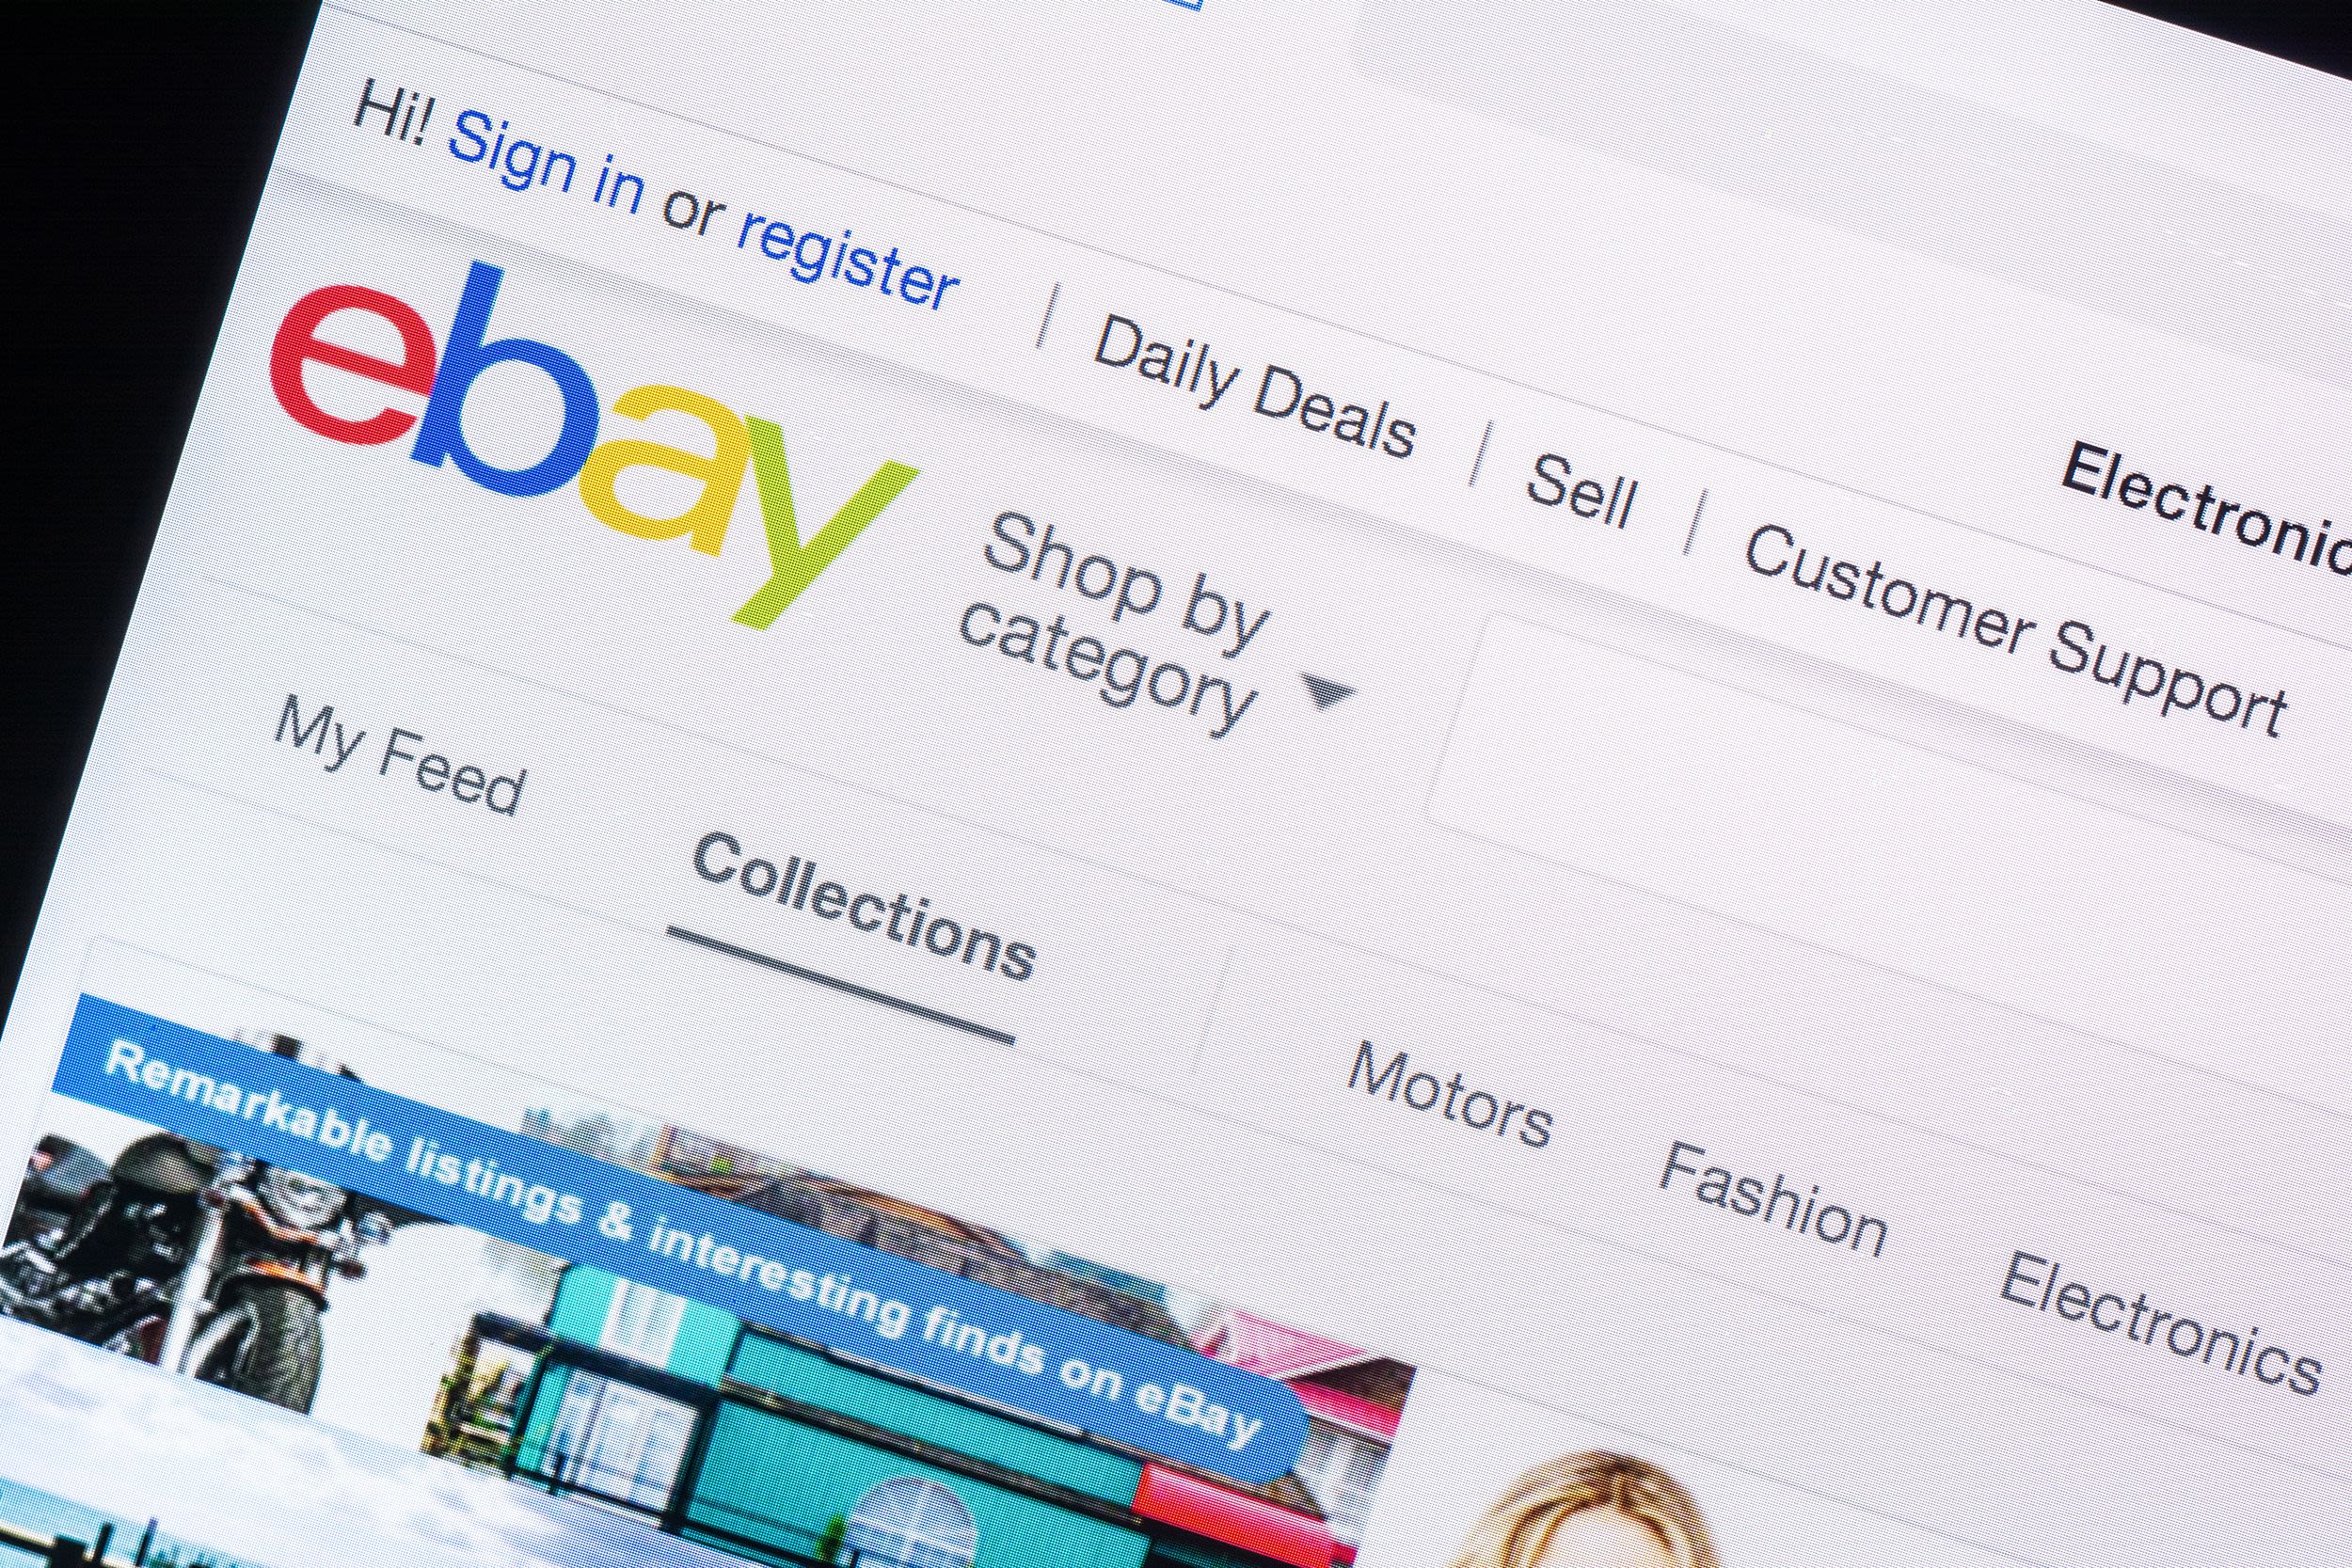 10 Things That Sold for Bonkers Amounts on eBay